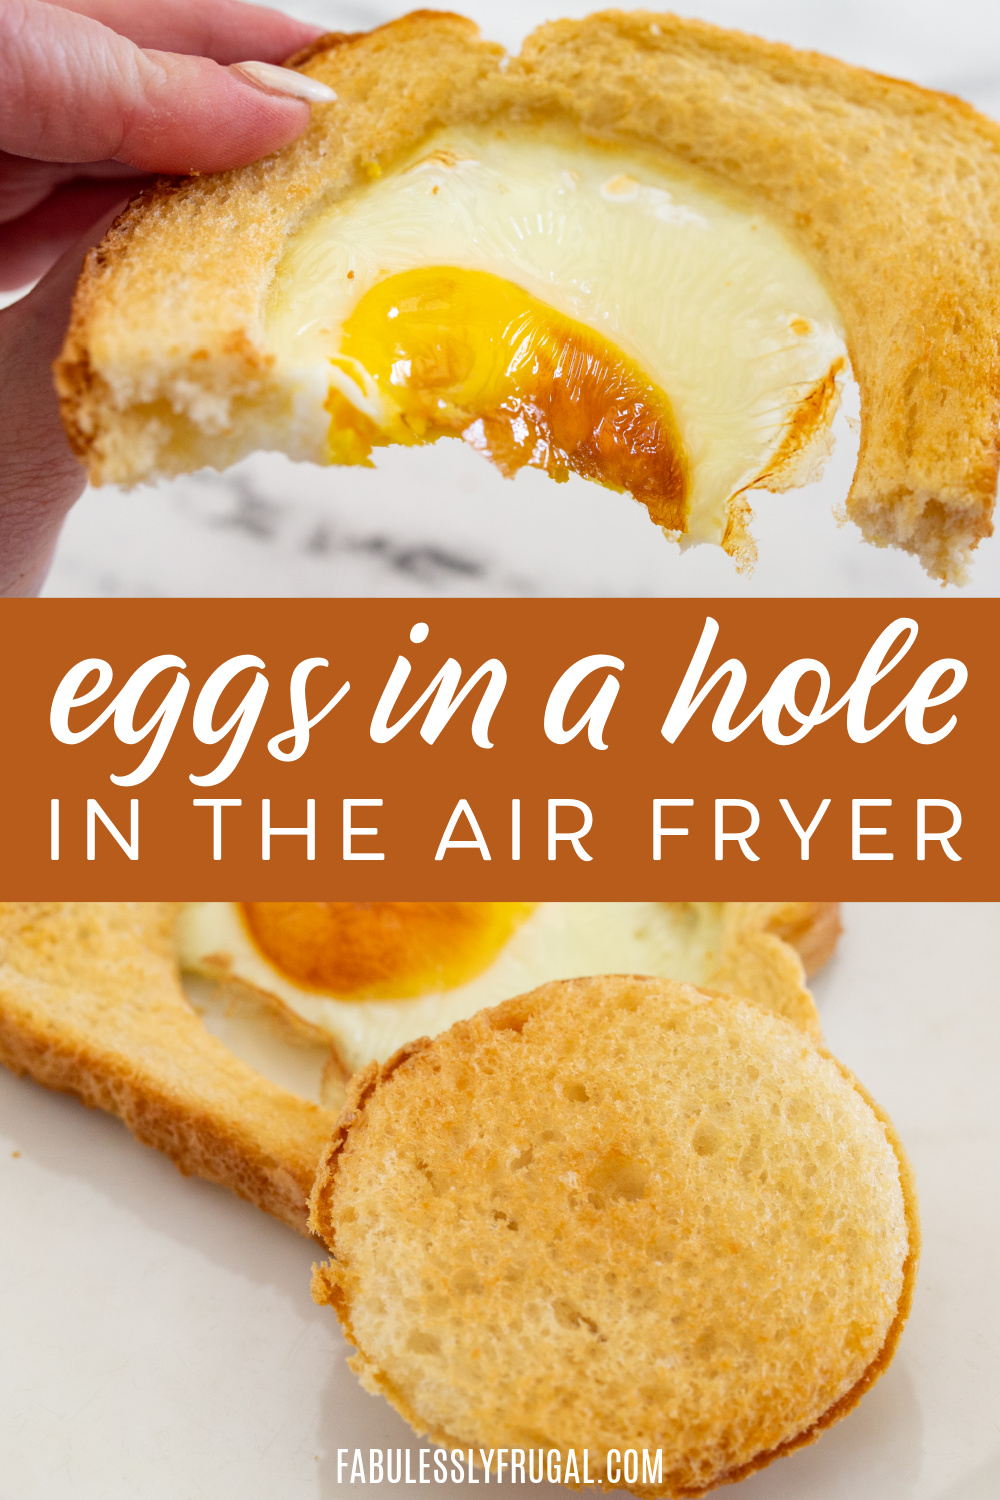 https://fabulesslyfrugal.com/wp-content/uploads/2023/04/how-to-make-eggs-in-a-hole-in-the-air-fryer-2.jpg